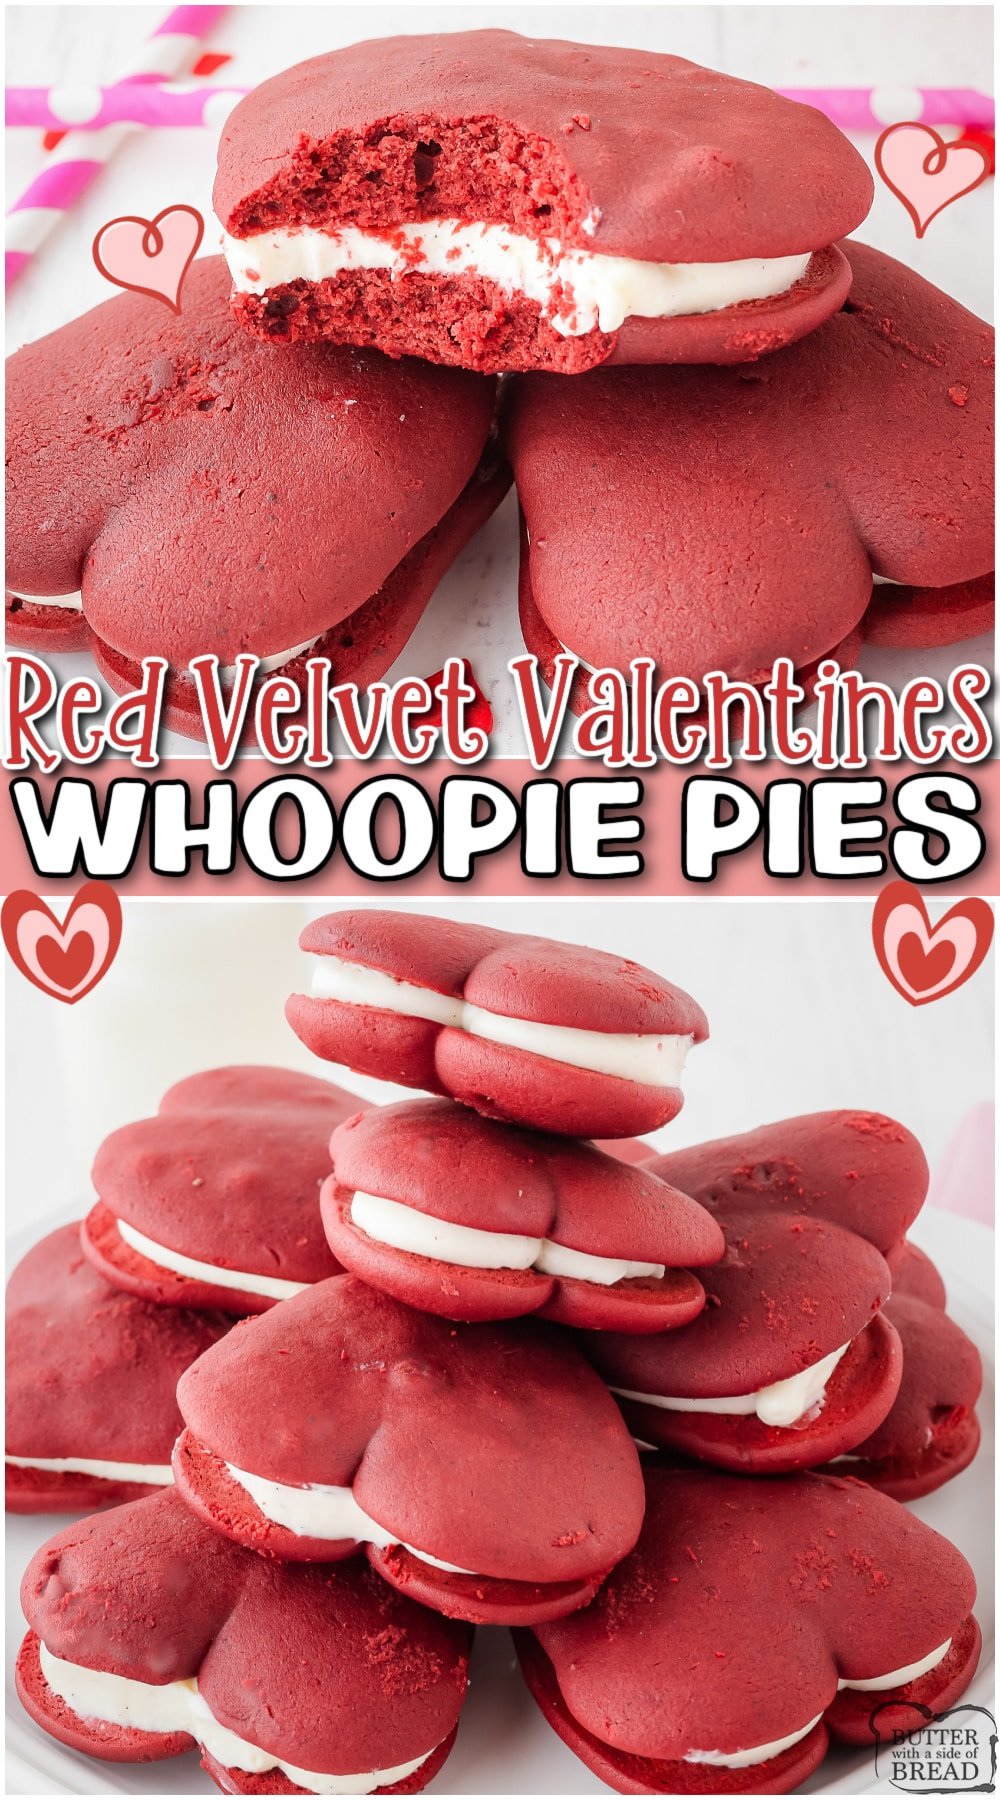 Festive red velvet Valentine's Whoopie Pies made from scratch with butter, sugars, buttermilk, cocoa powder & red coloring! Soft & decadent heart shaped pies filled with silky cream cheese frosting everyone loves! 